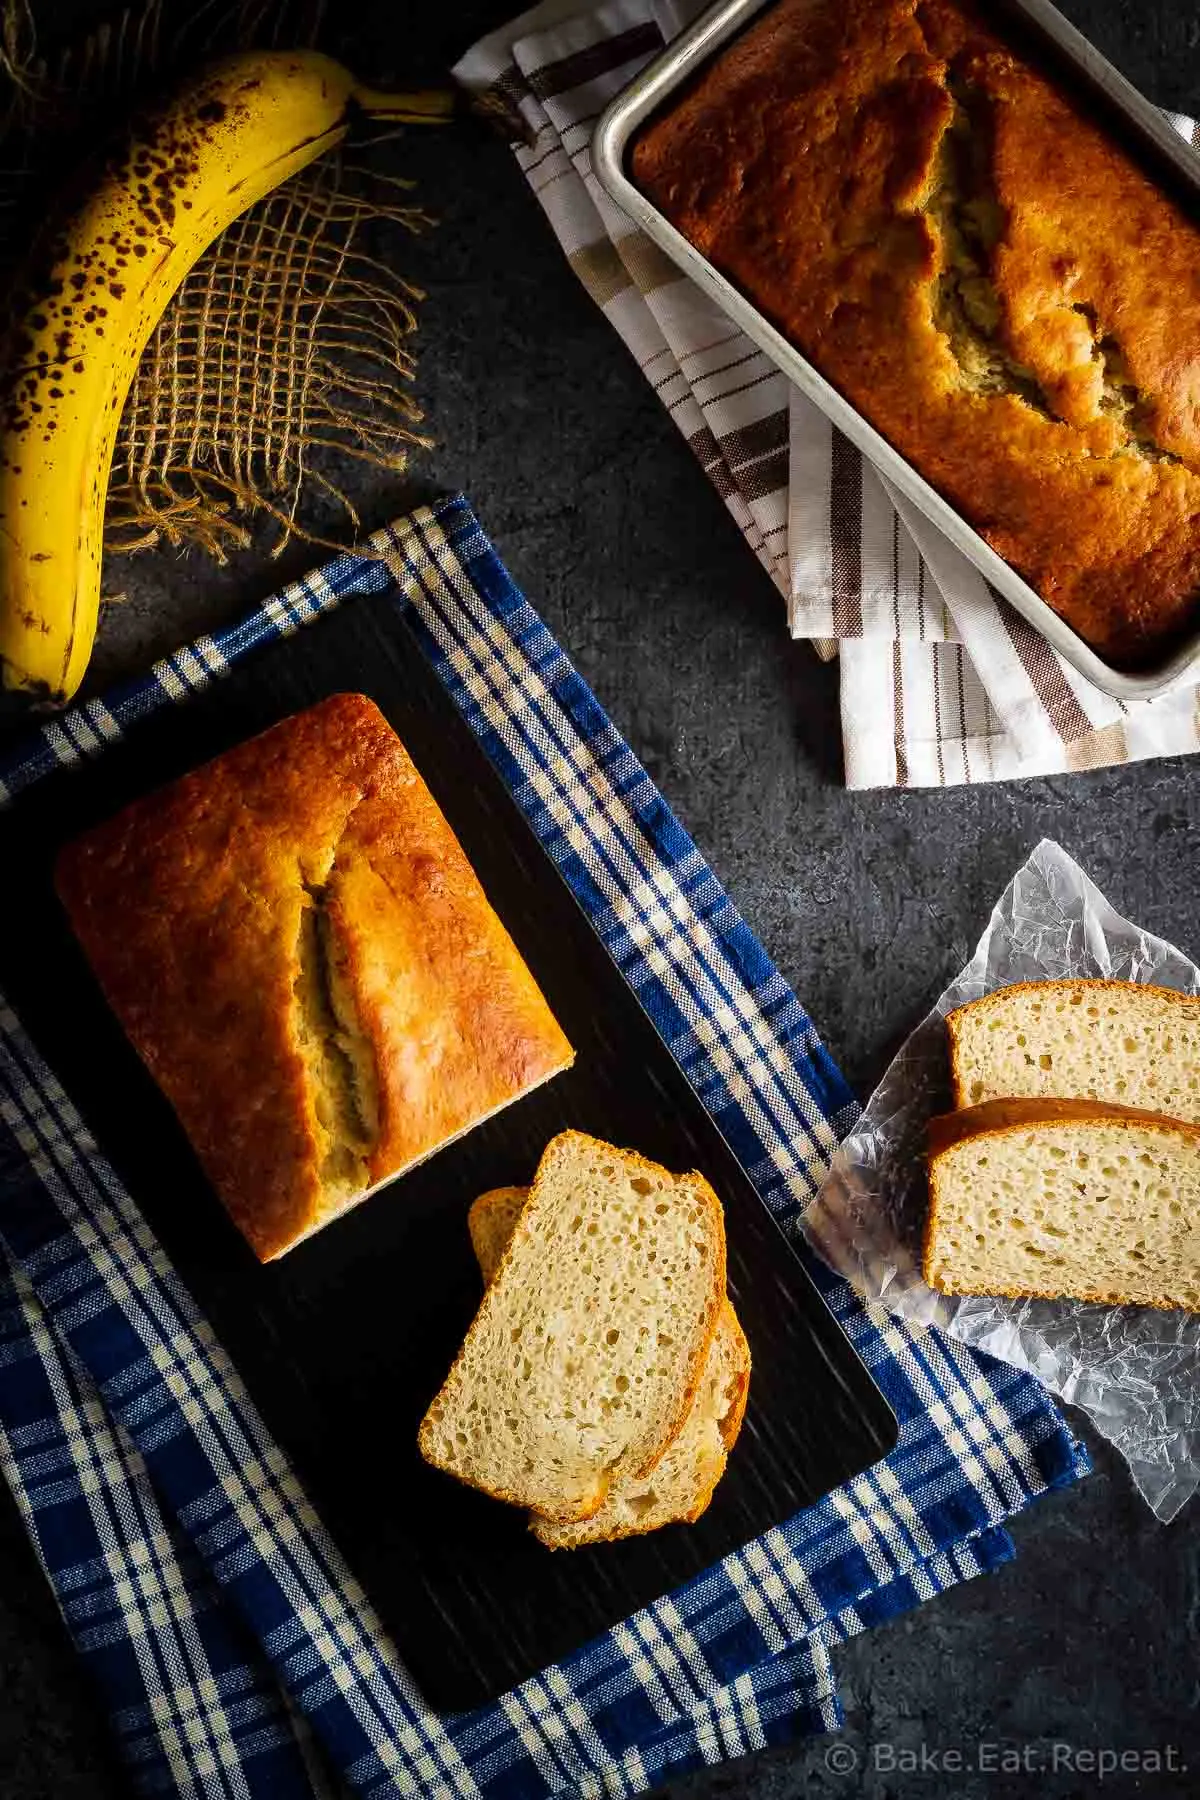 This classic banana bread is easy to make and everyone will love it - the best way to use up some over-ripe bananas, and it makes a great breakfast or snack!